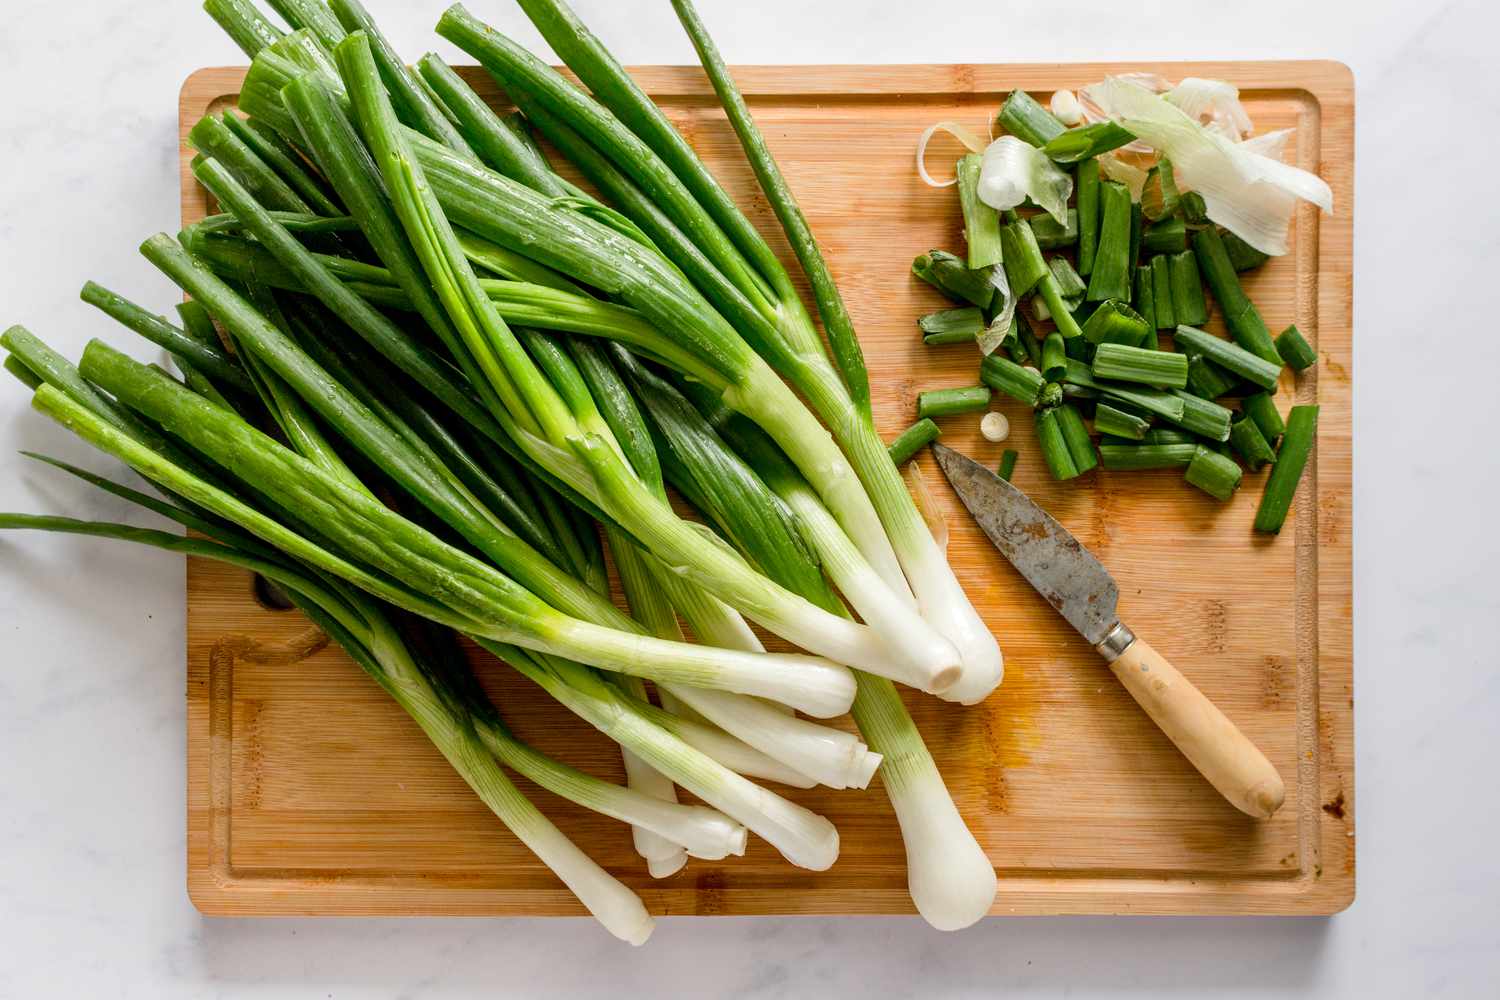 15 Facts About Spring Onions - Facts.net